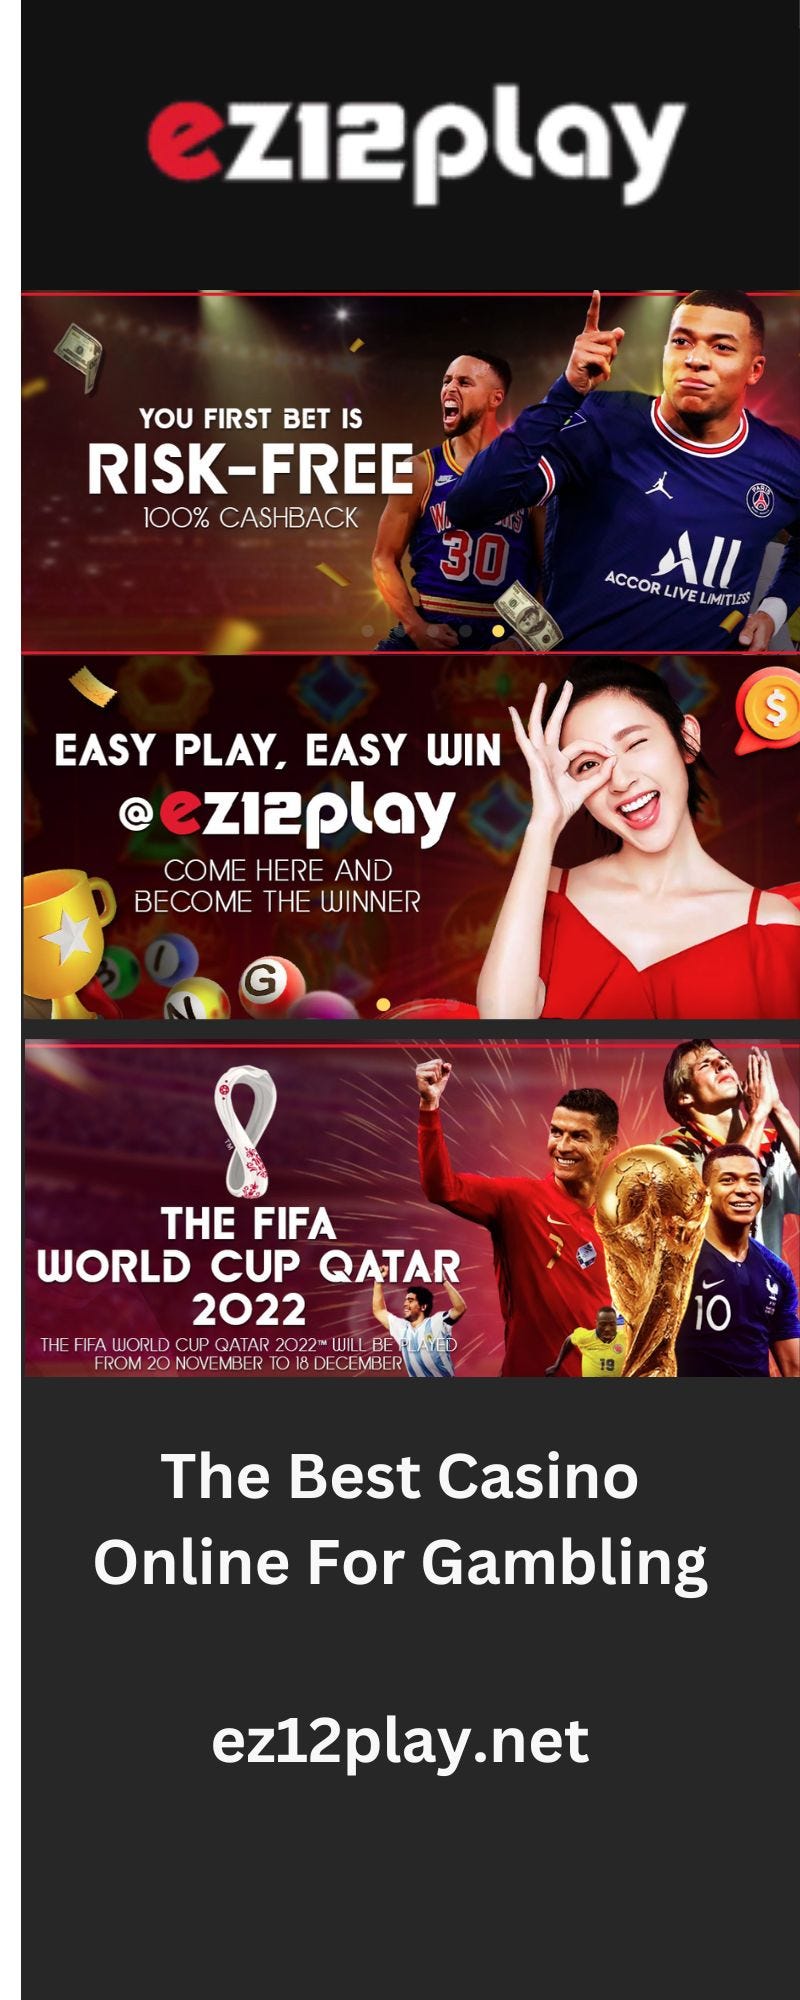 Playeasy: Sporting Events - Apps on Google Play